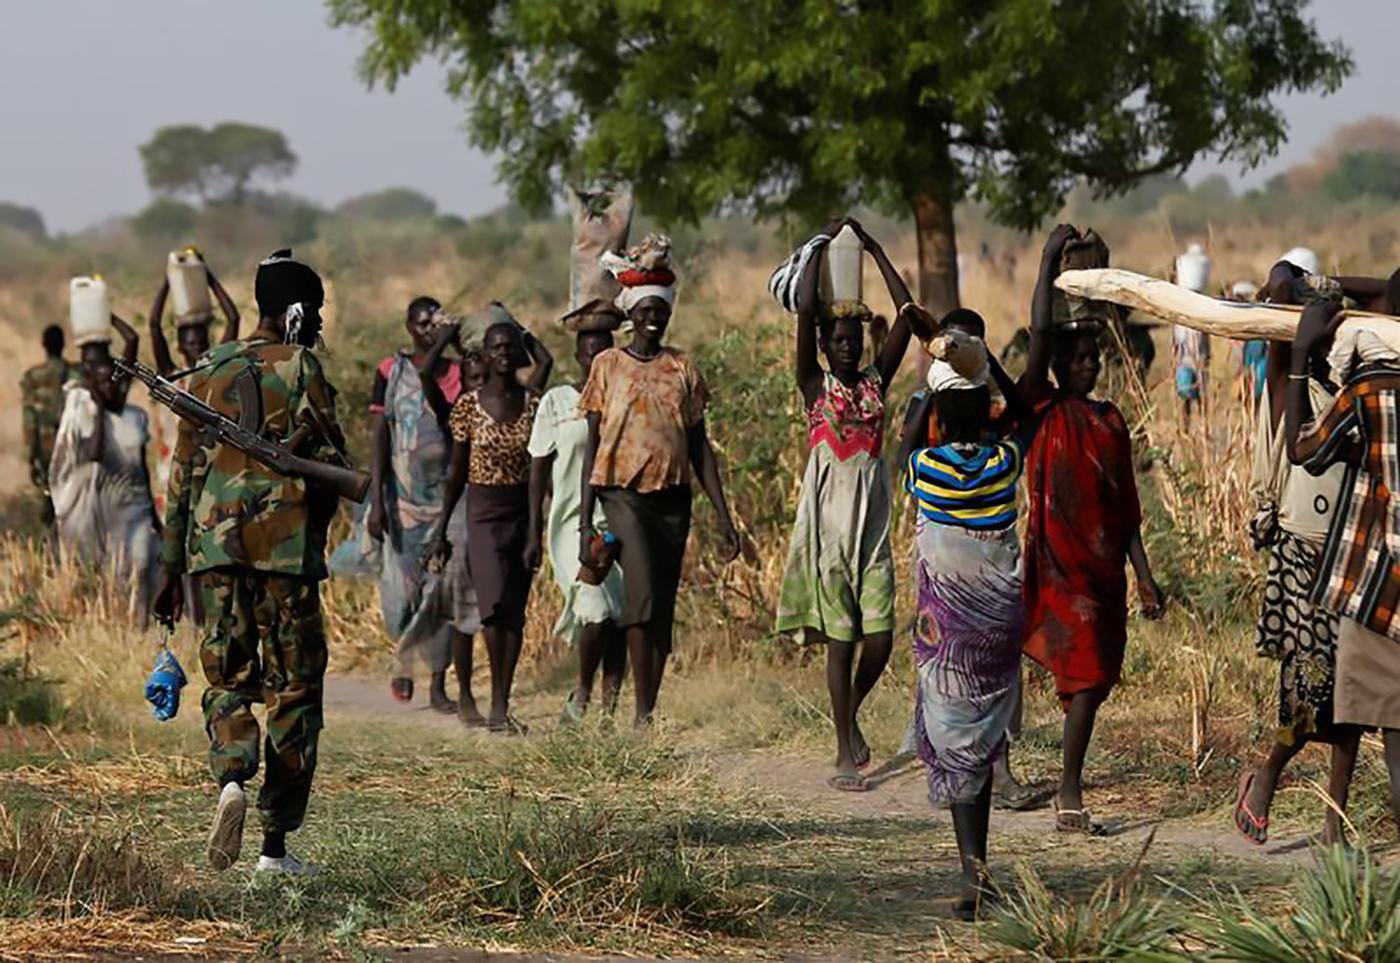 The Venture of Separatism: Lessons From the Secession of South Sudan